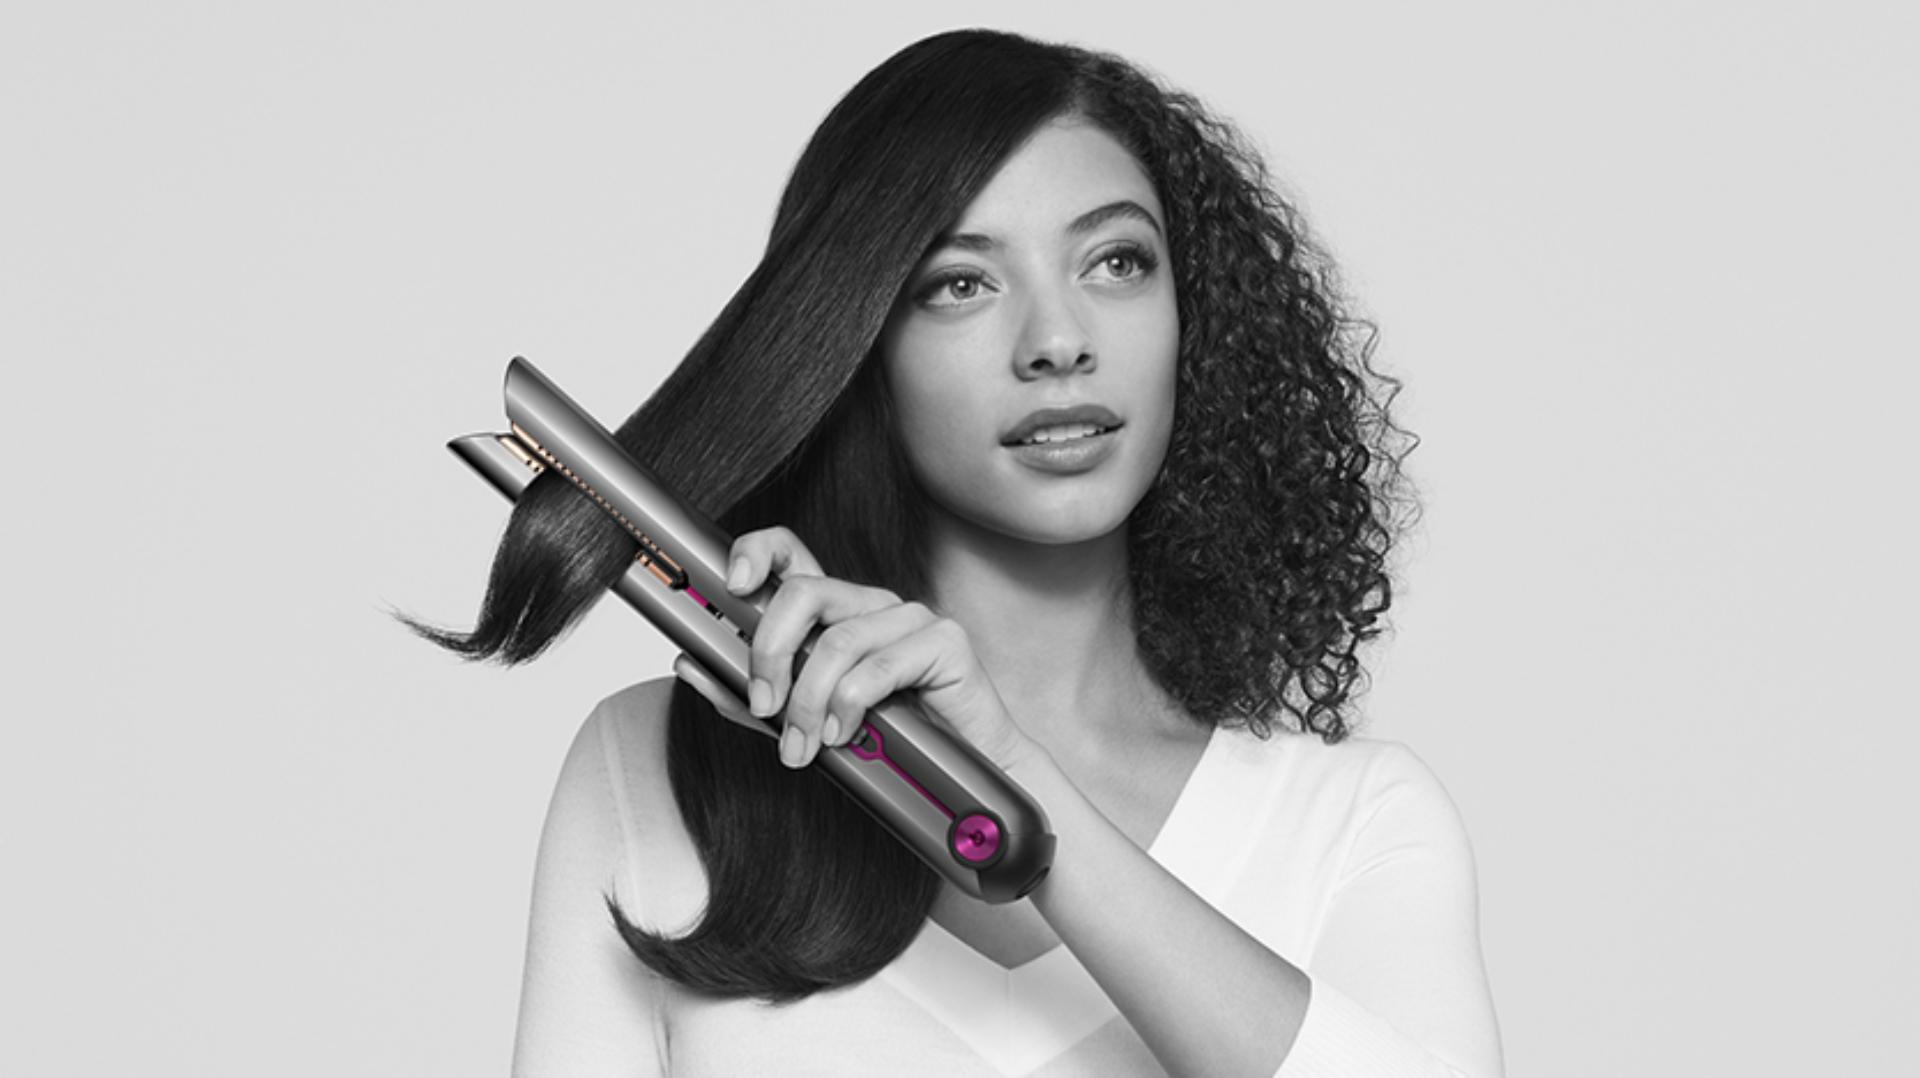 Female model holding the Dyson Corrale straightener in one hand